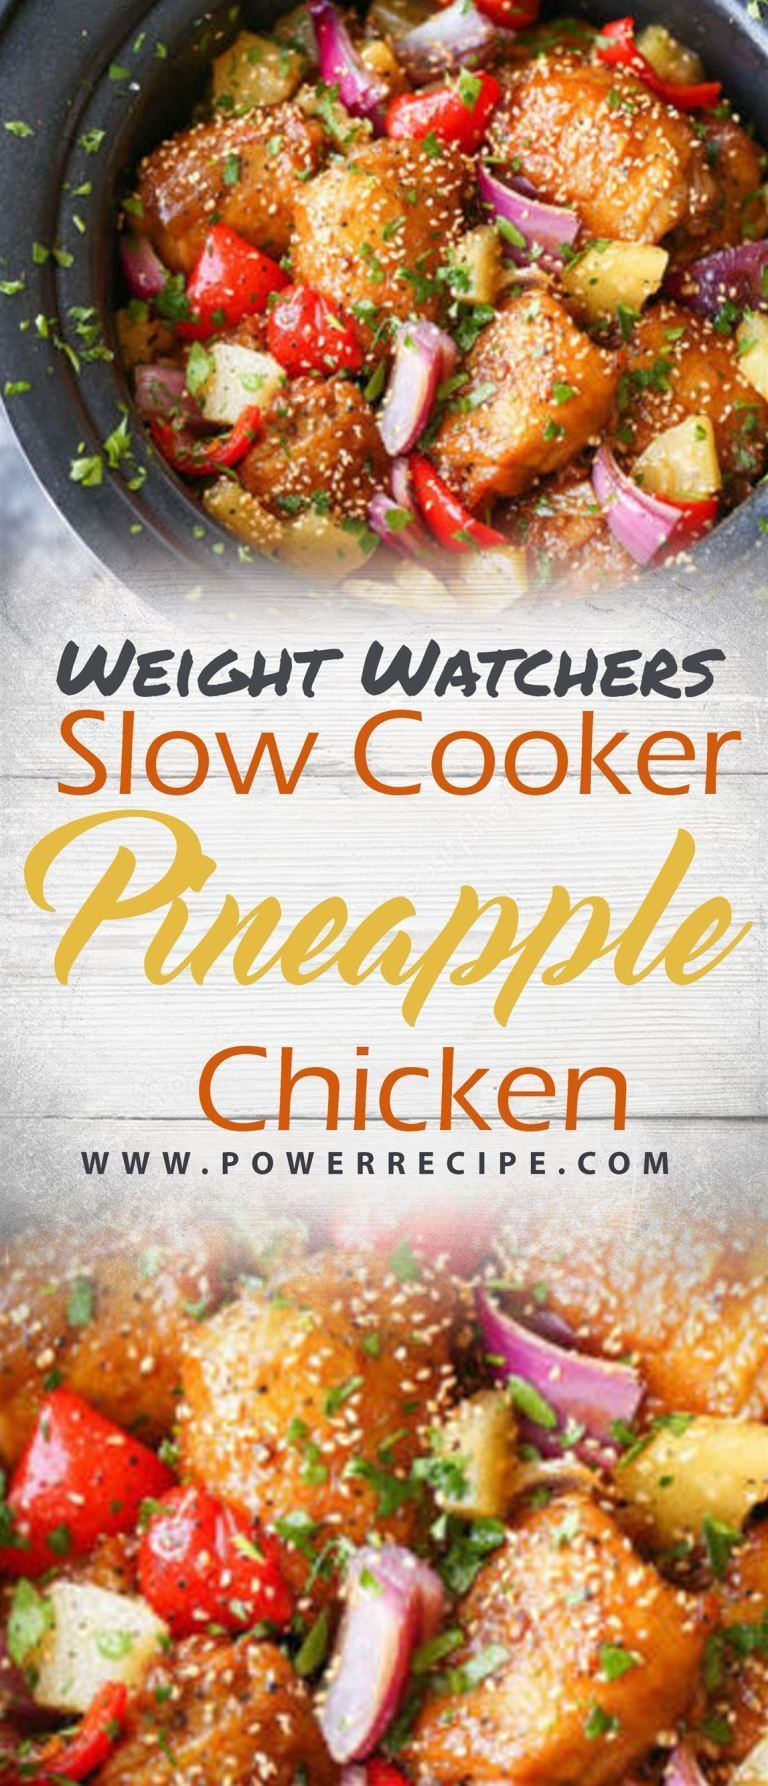 Low Fat Chicken Recipes Weight Watchers
 Pin on Ww recipes